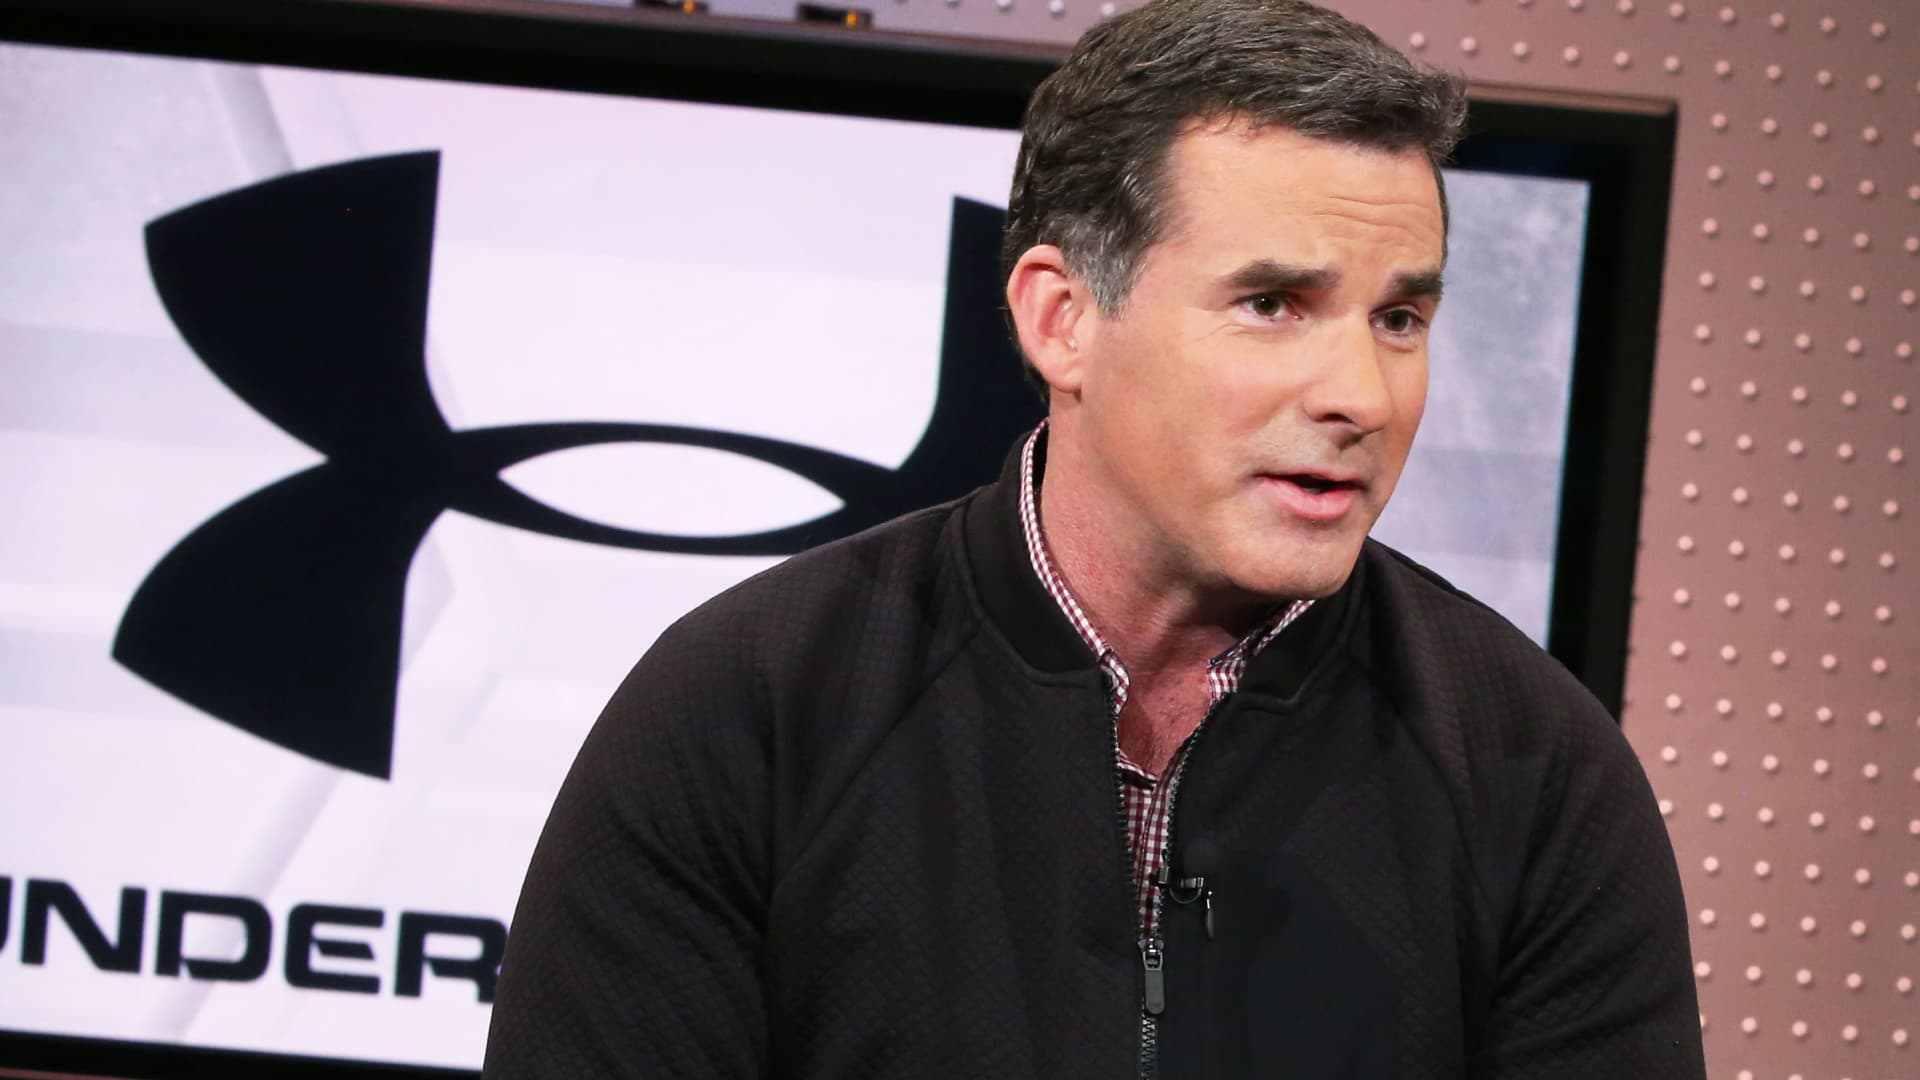 Under Armour founder used TV anchor’s advice when facing negative coverage, records show